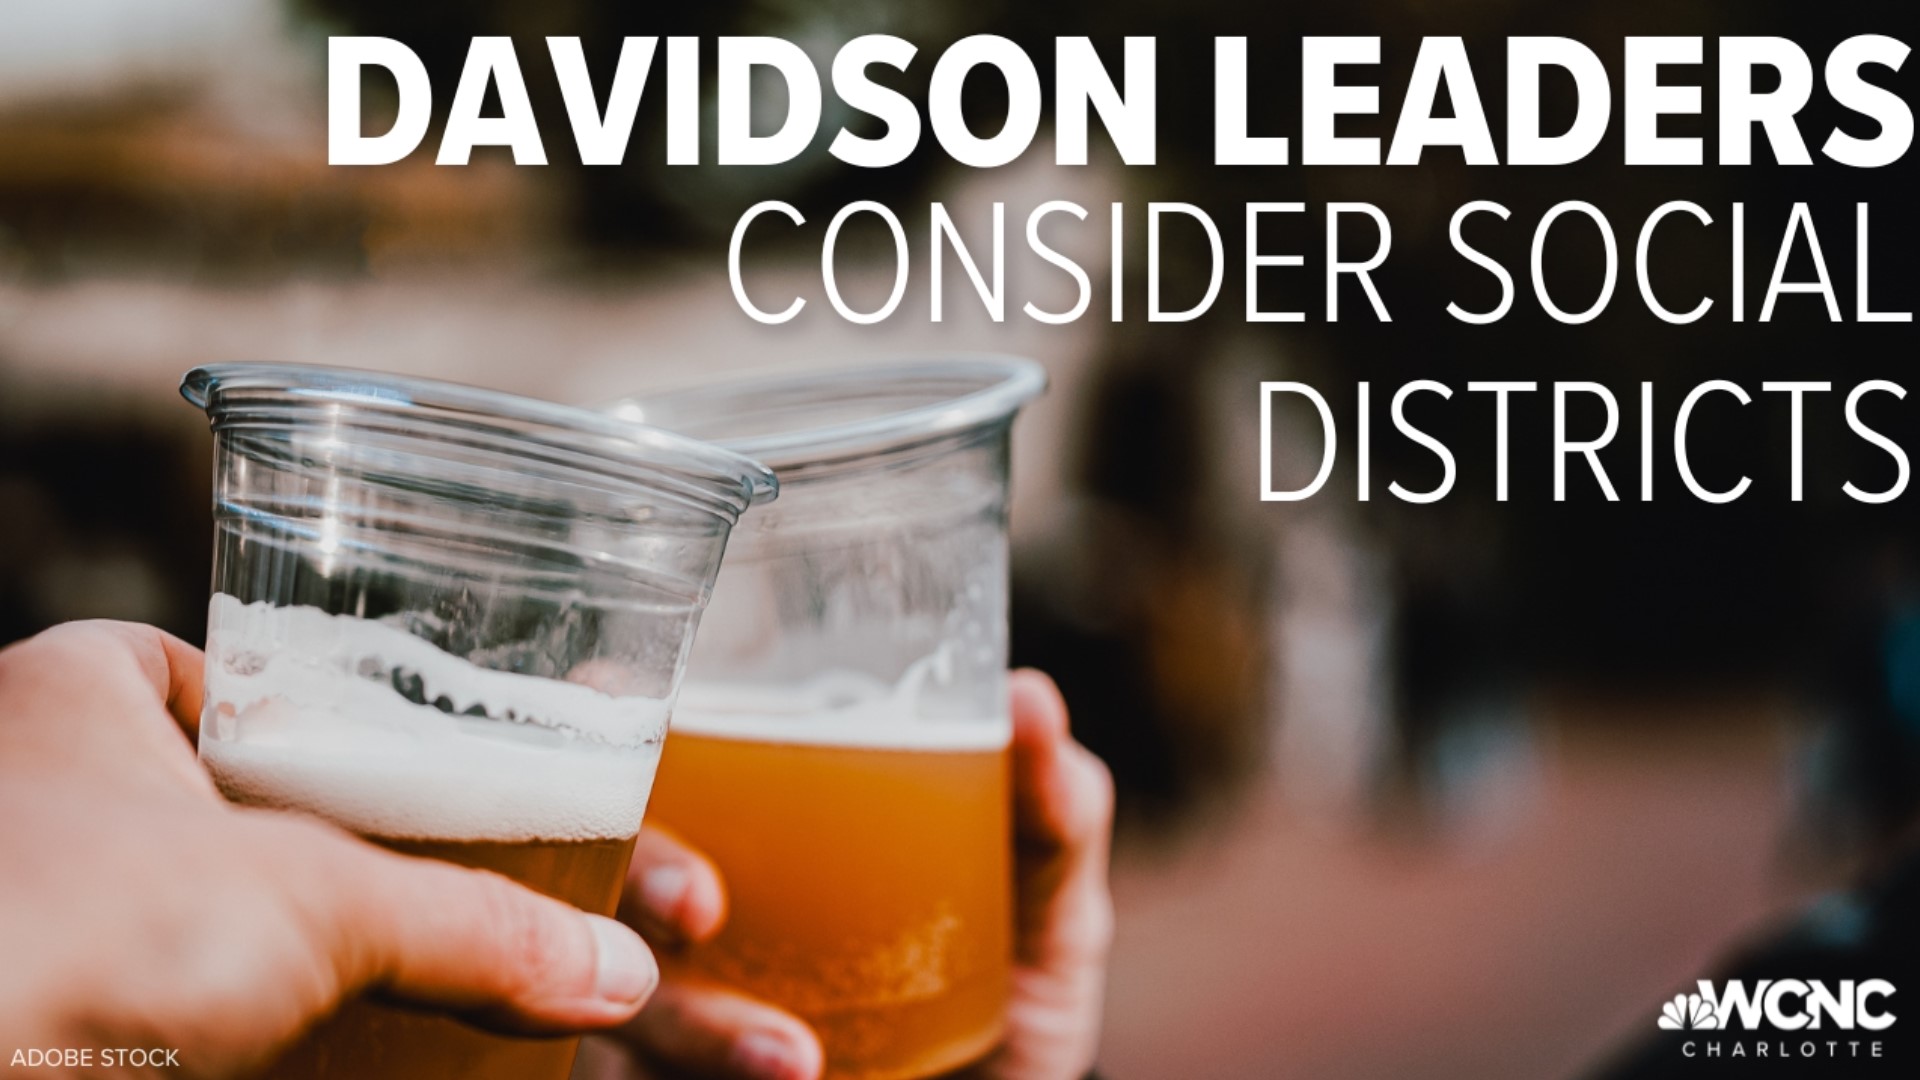 Leaders in Davidson are considering social districts in some parts of town.